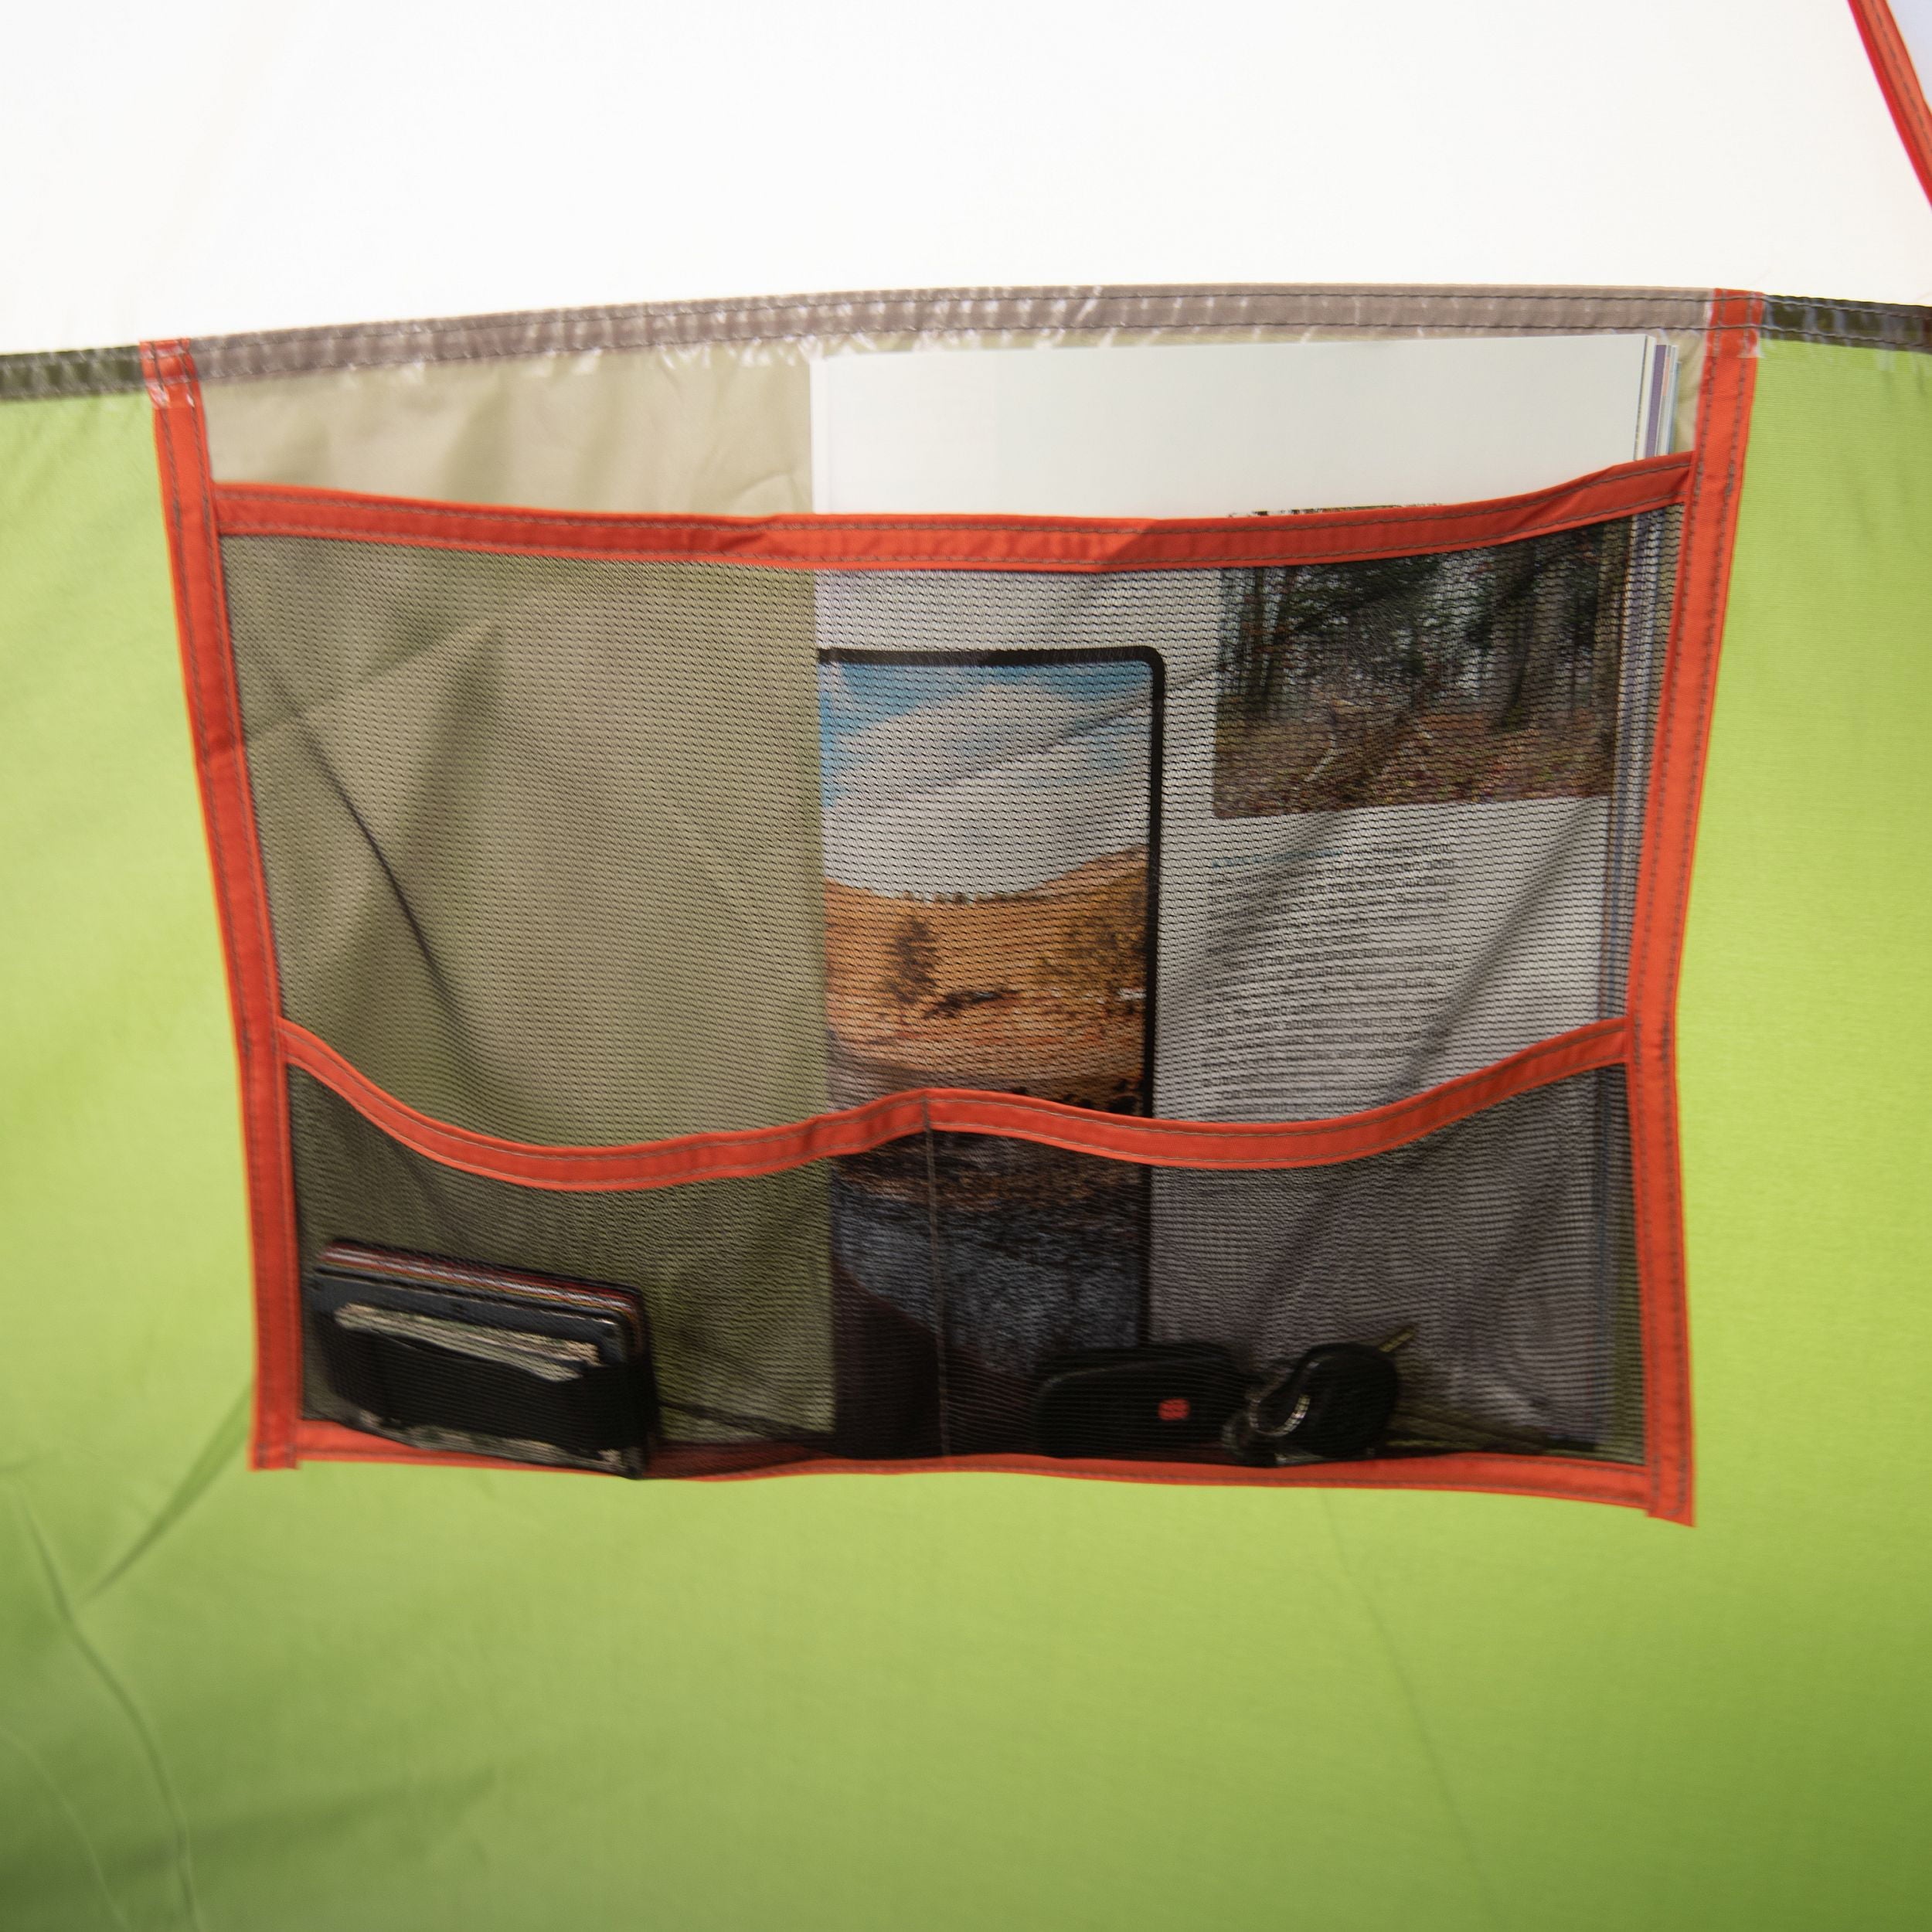 Ozark Trail Hazel Creek 18-Person Cabin Tent, with 3 Covered Entrances